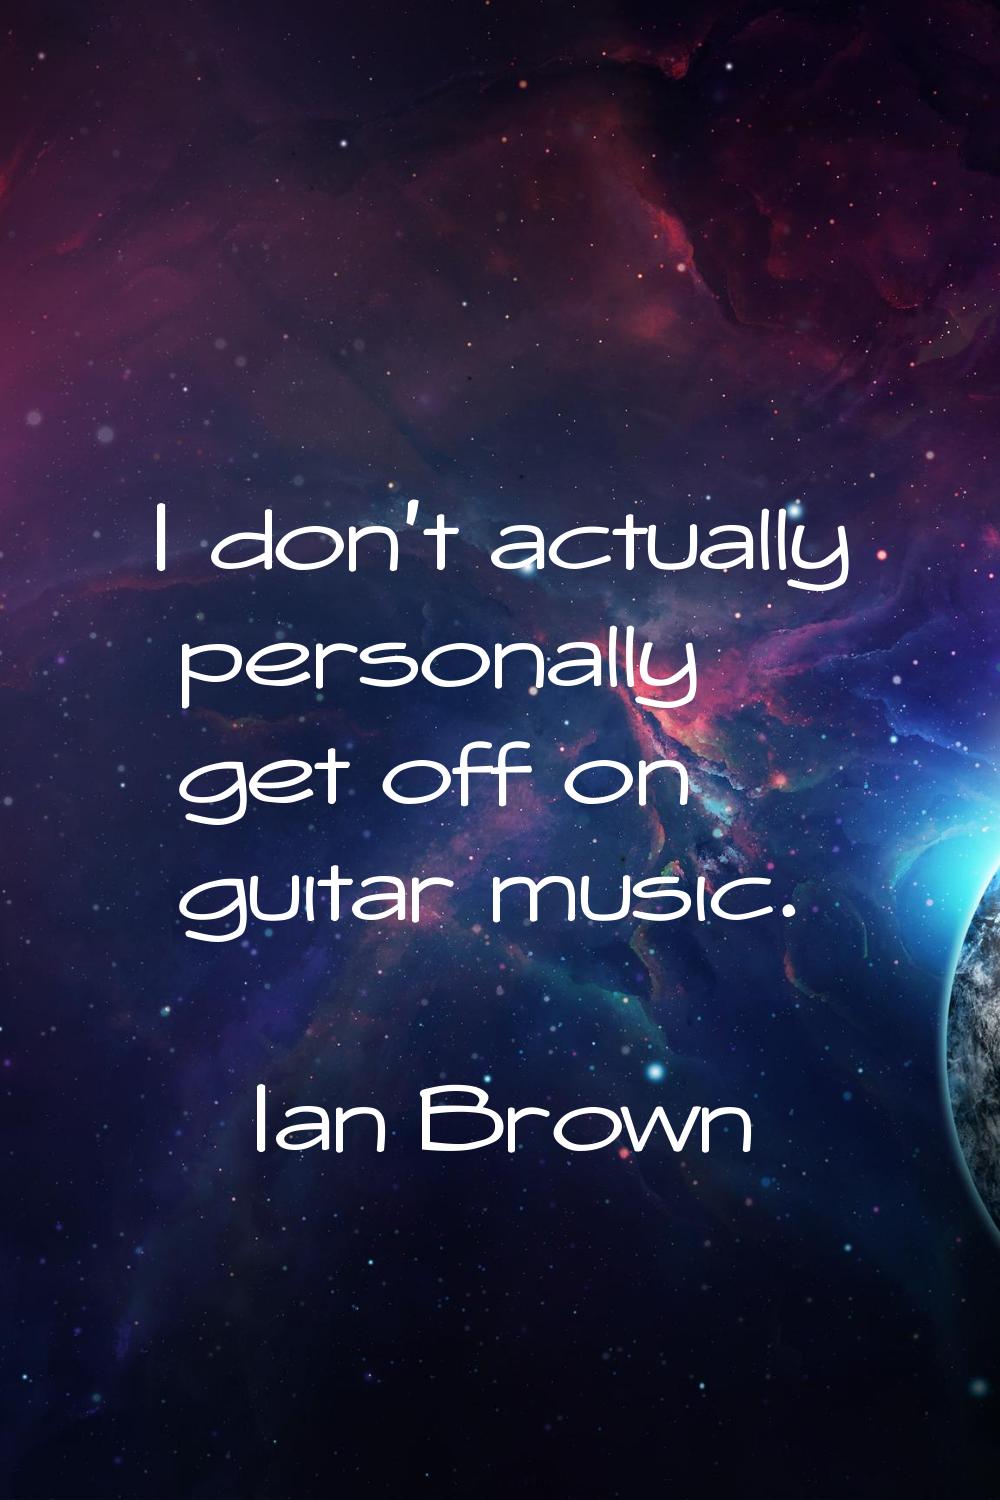 I don't actually personally get off on guitar music.